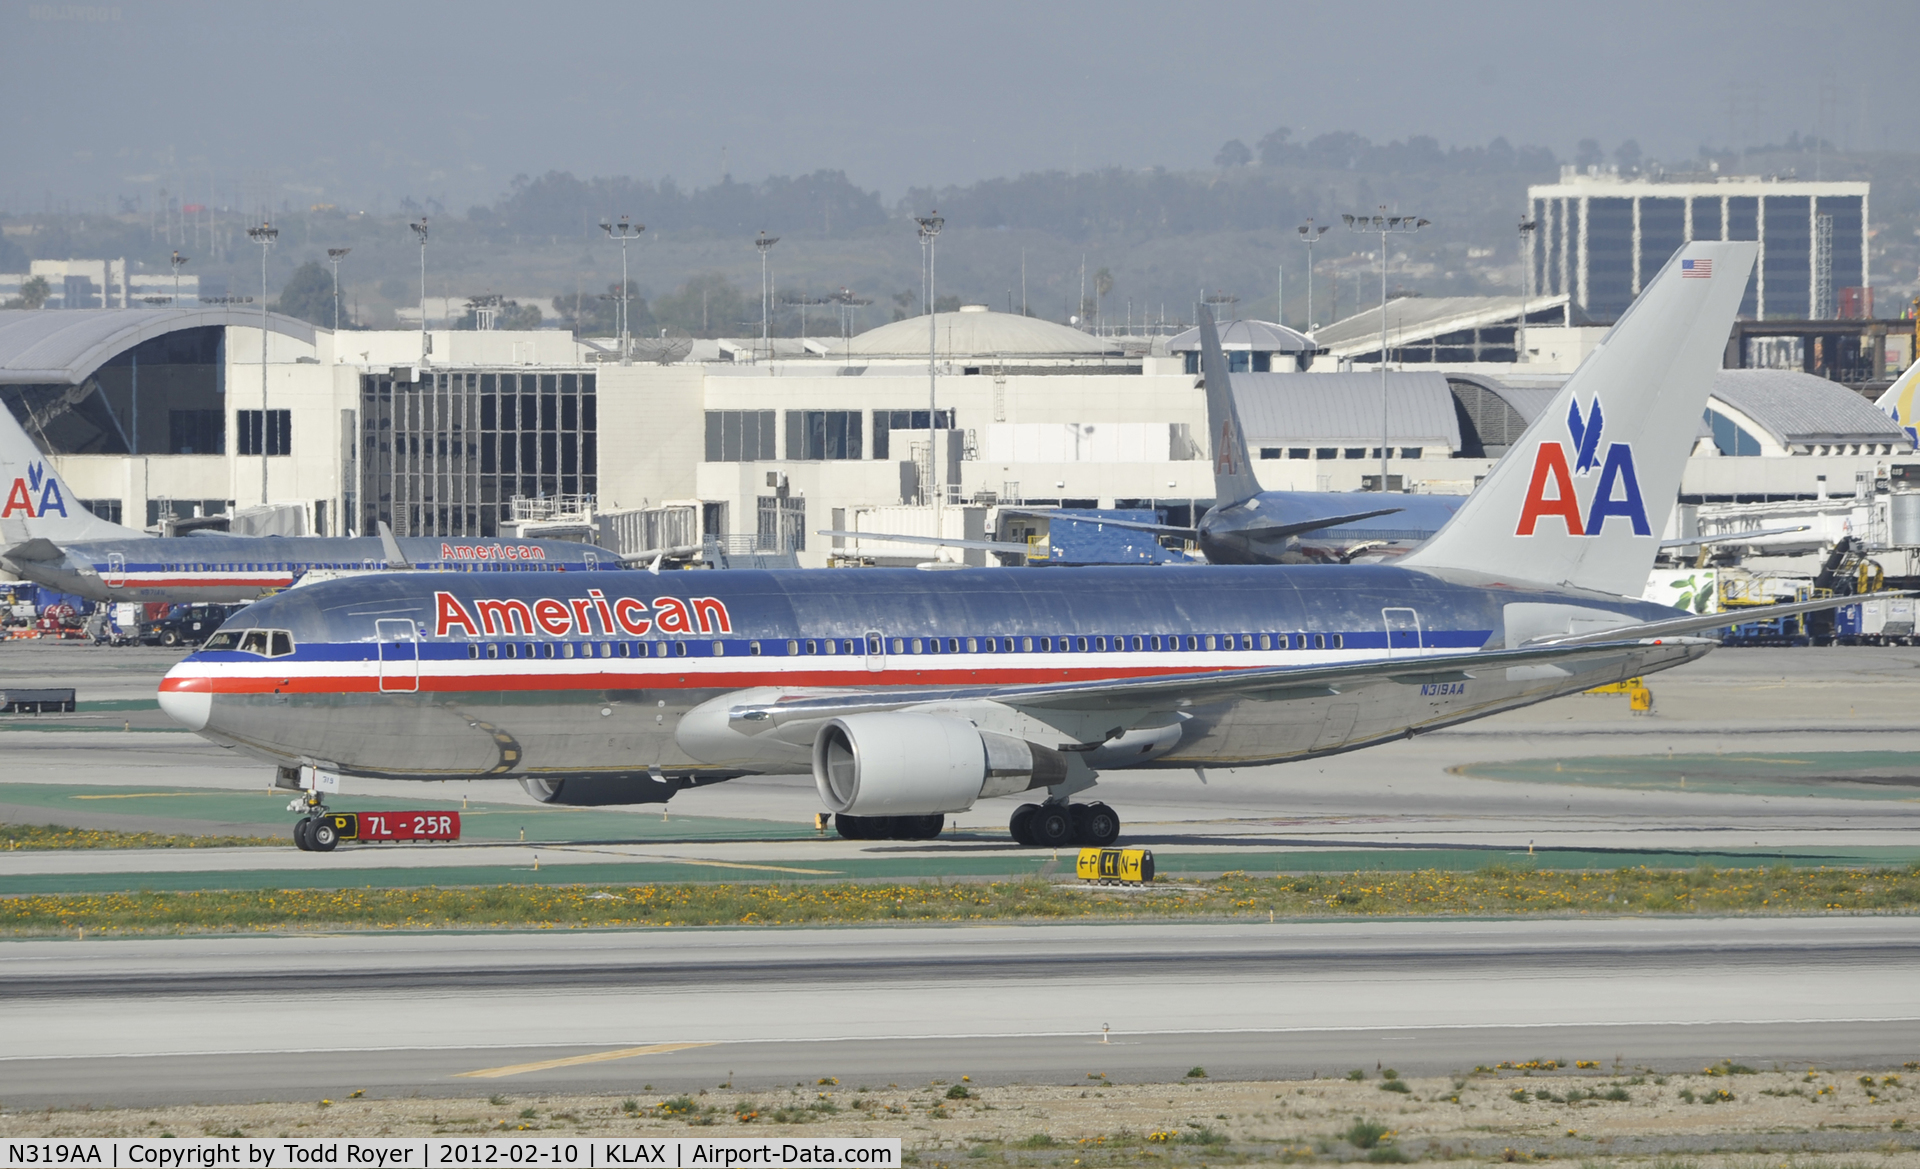 N319AA, 1985 Boeing 767-223 C/N 22320, Just arrived at LAX on 25L